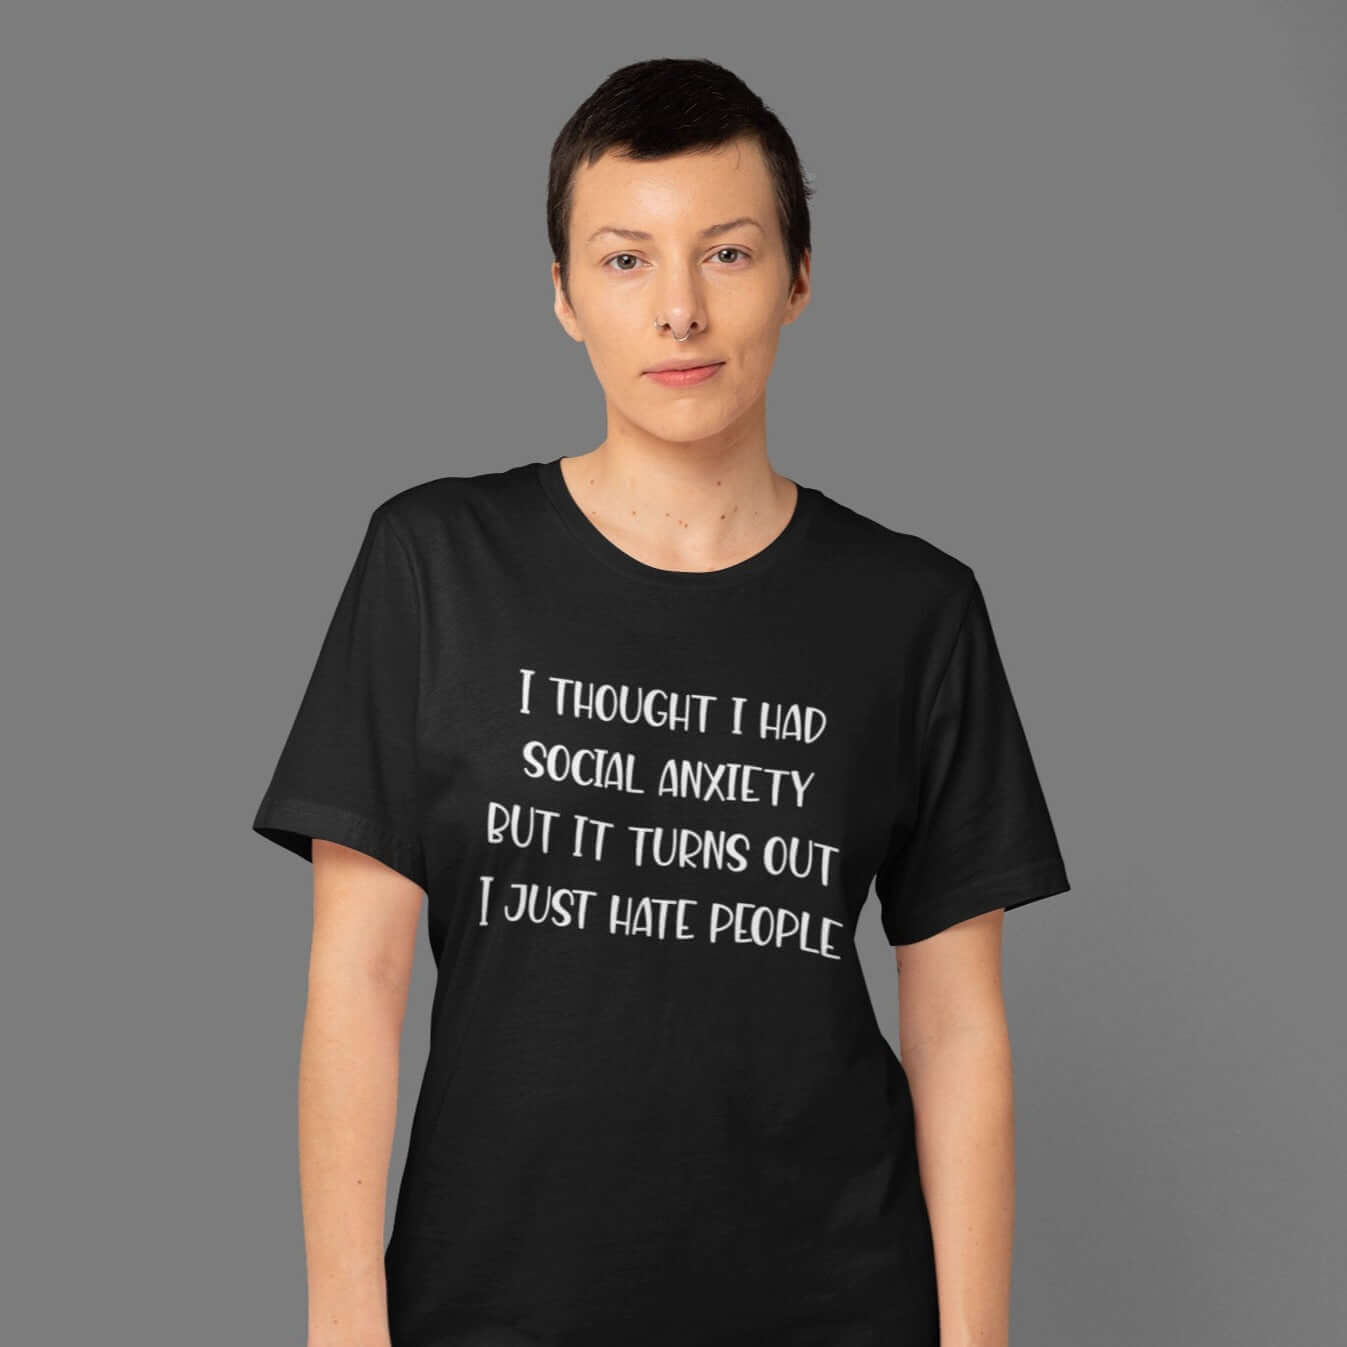 Woman wearing a black t-shirt with the phrase I thought I had social anxiety but it turns out I just hate people printed on the front.